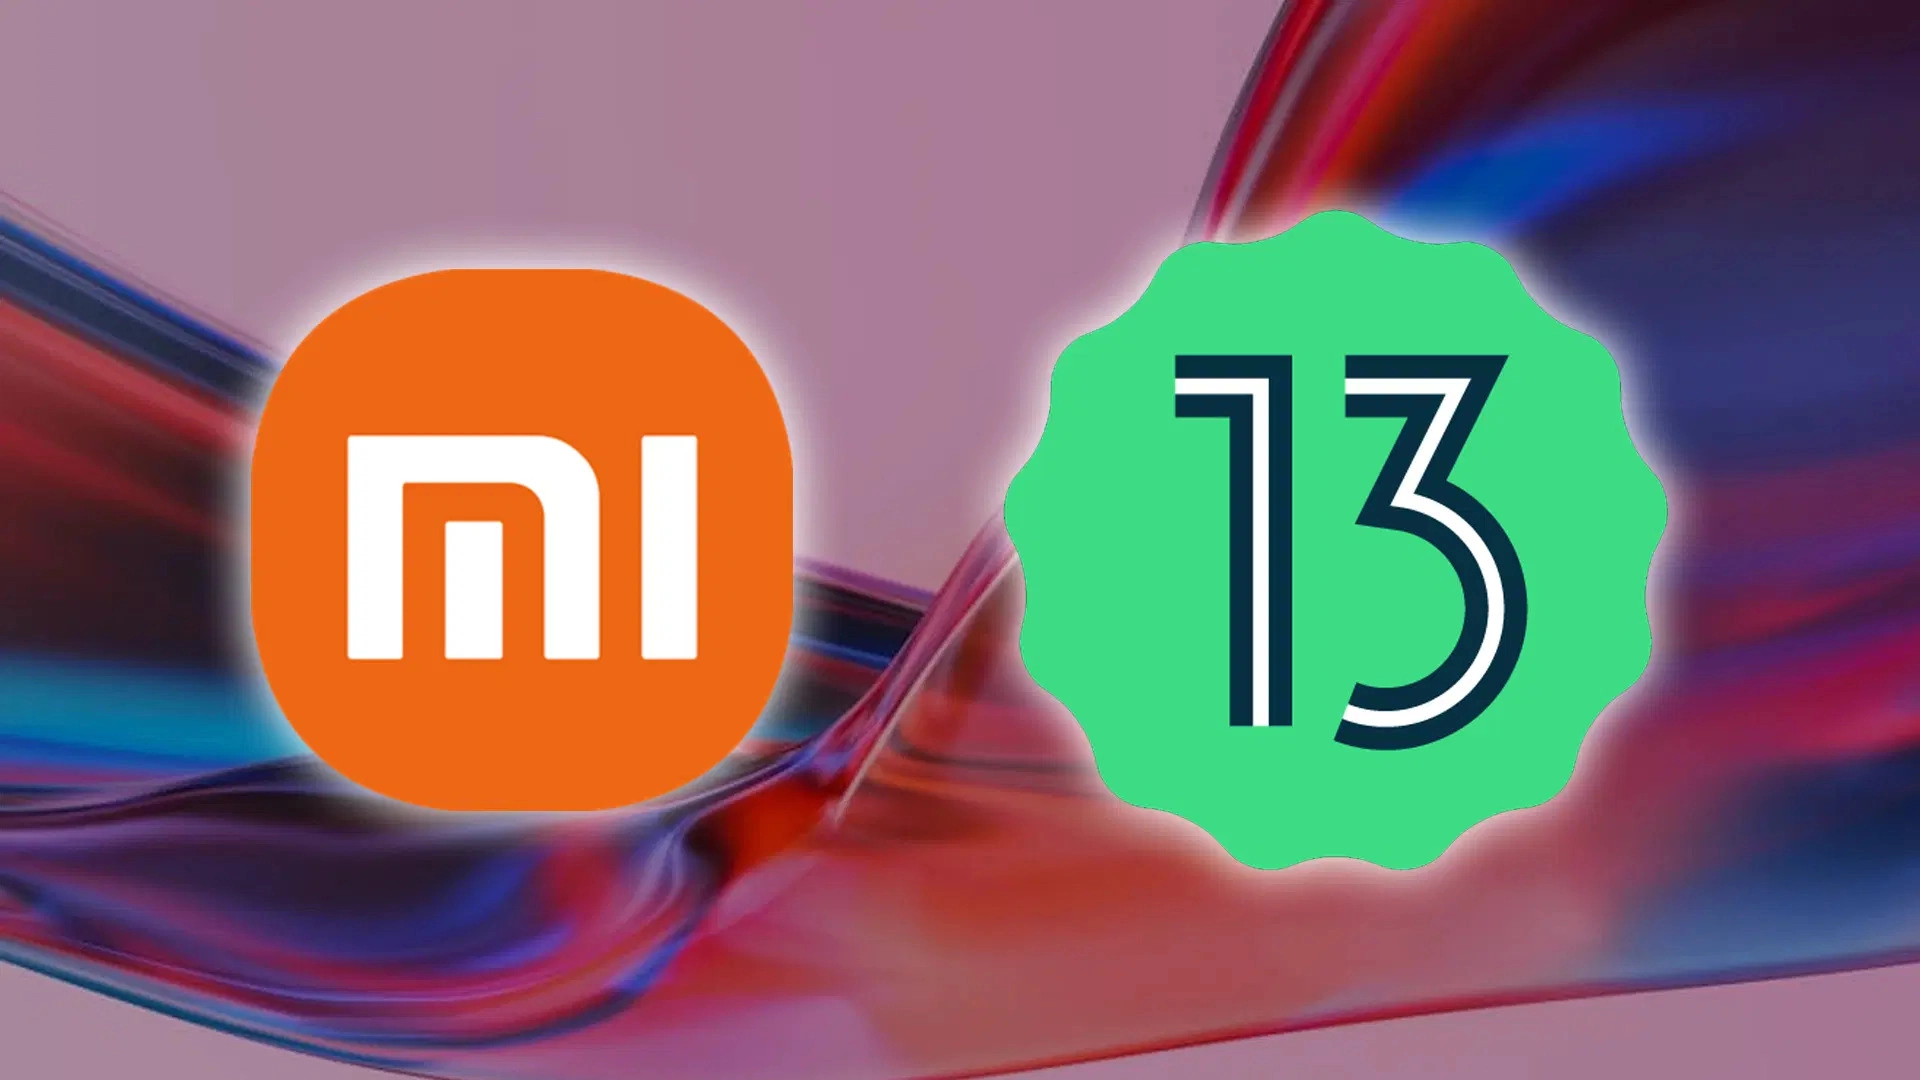 List of Xiaomi, POCO and Redmi devices that are targeting Android 13